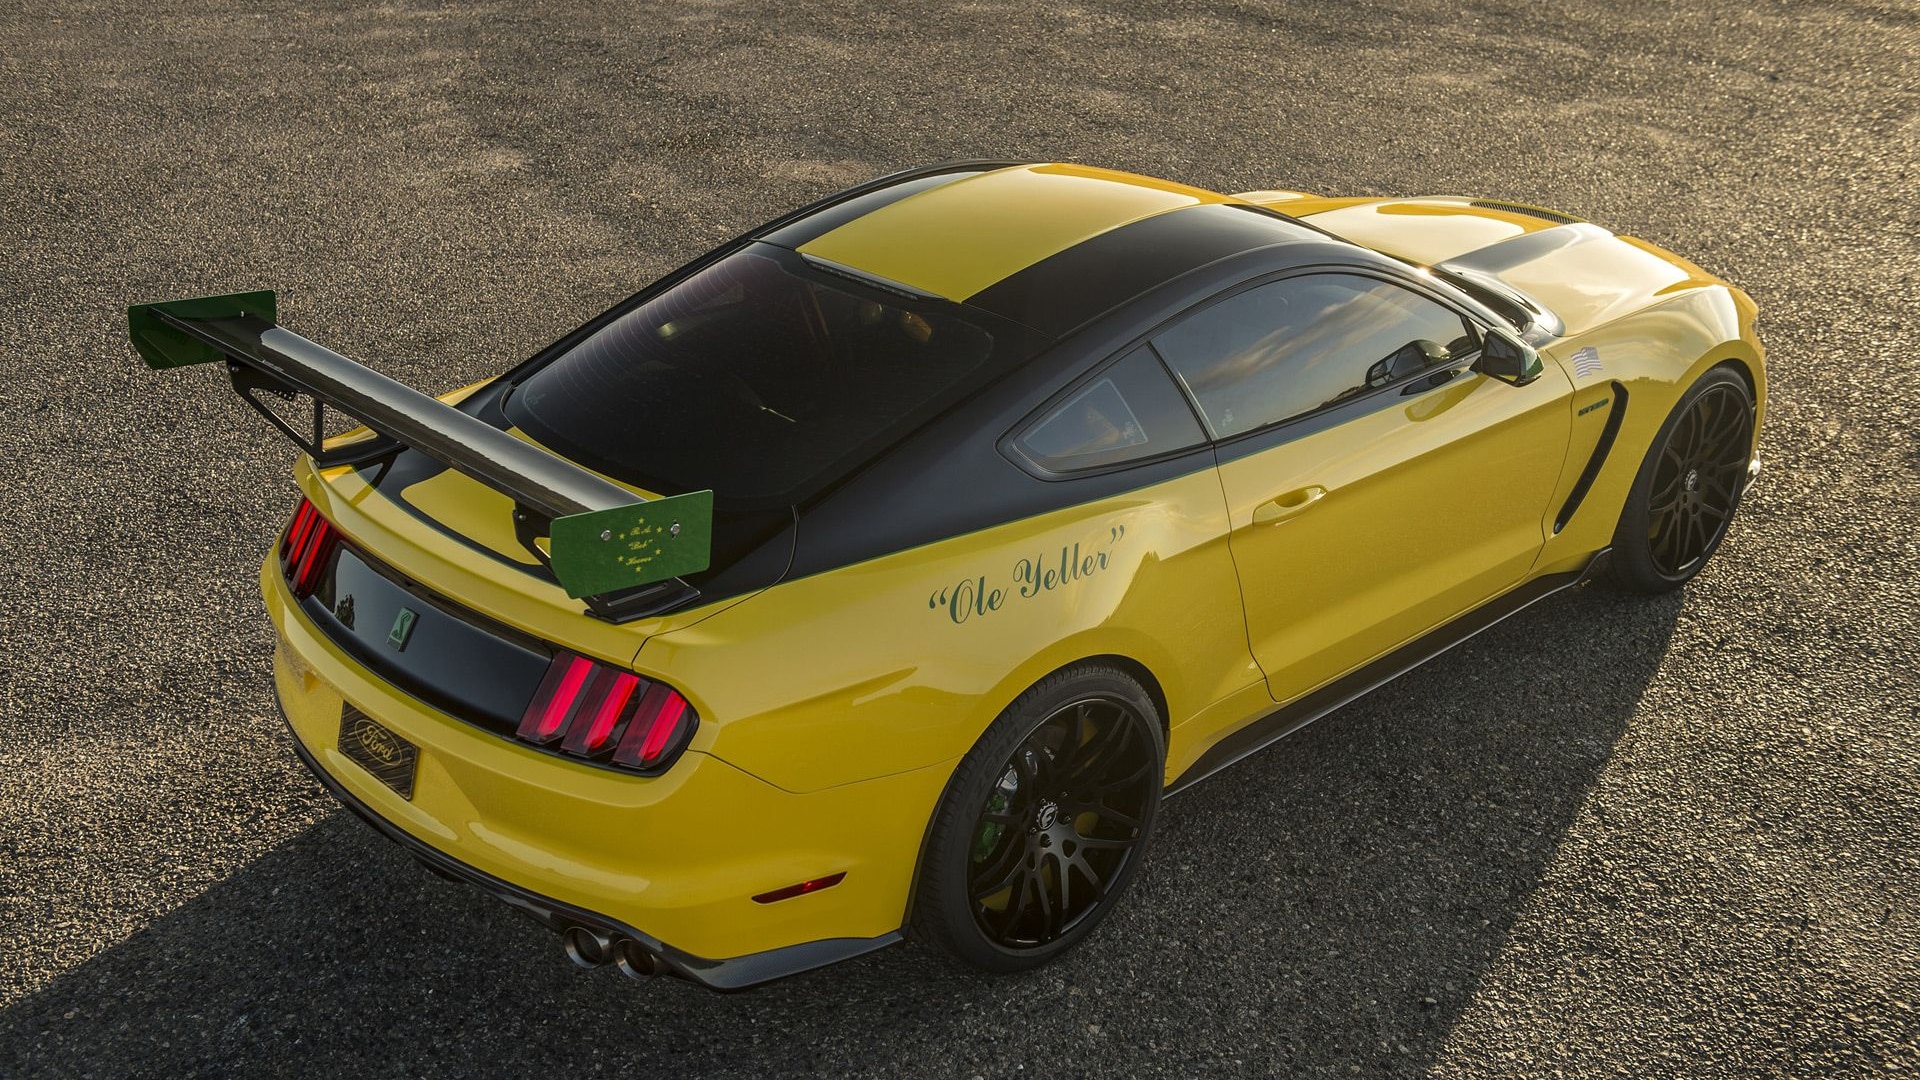 Ole Yeller 2016 Ford Mustang Shelby GT350